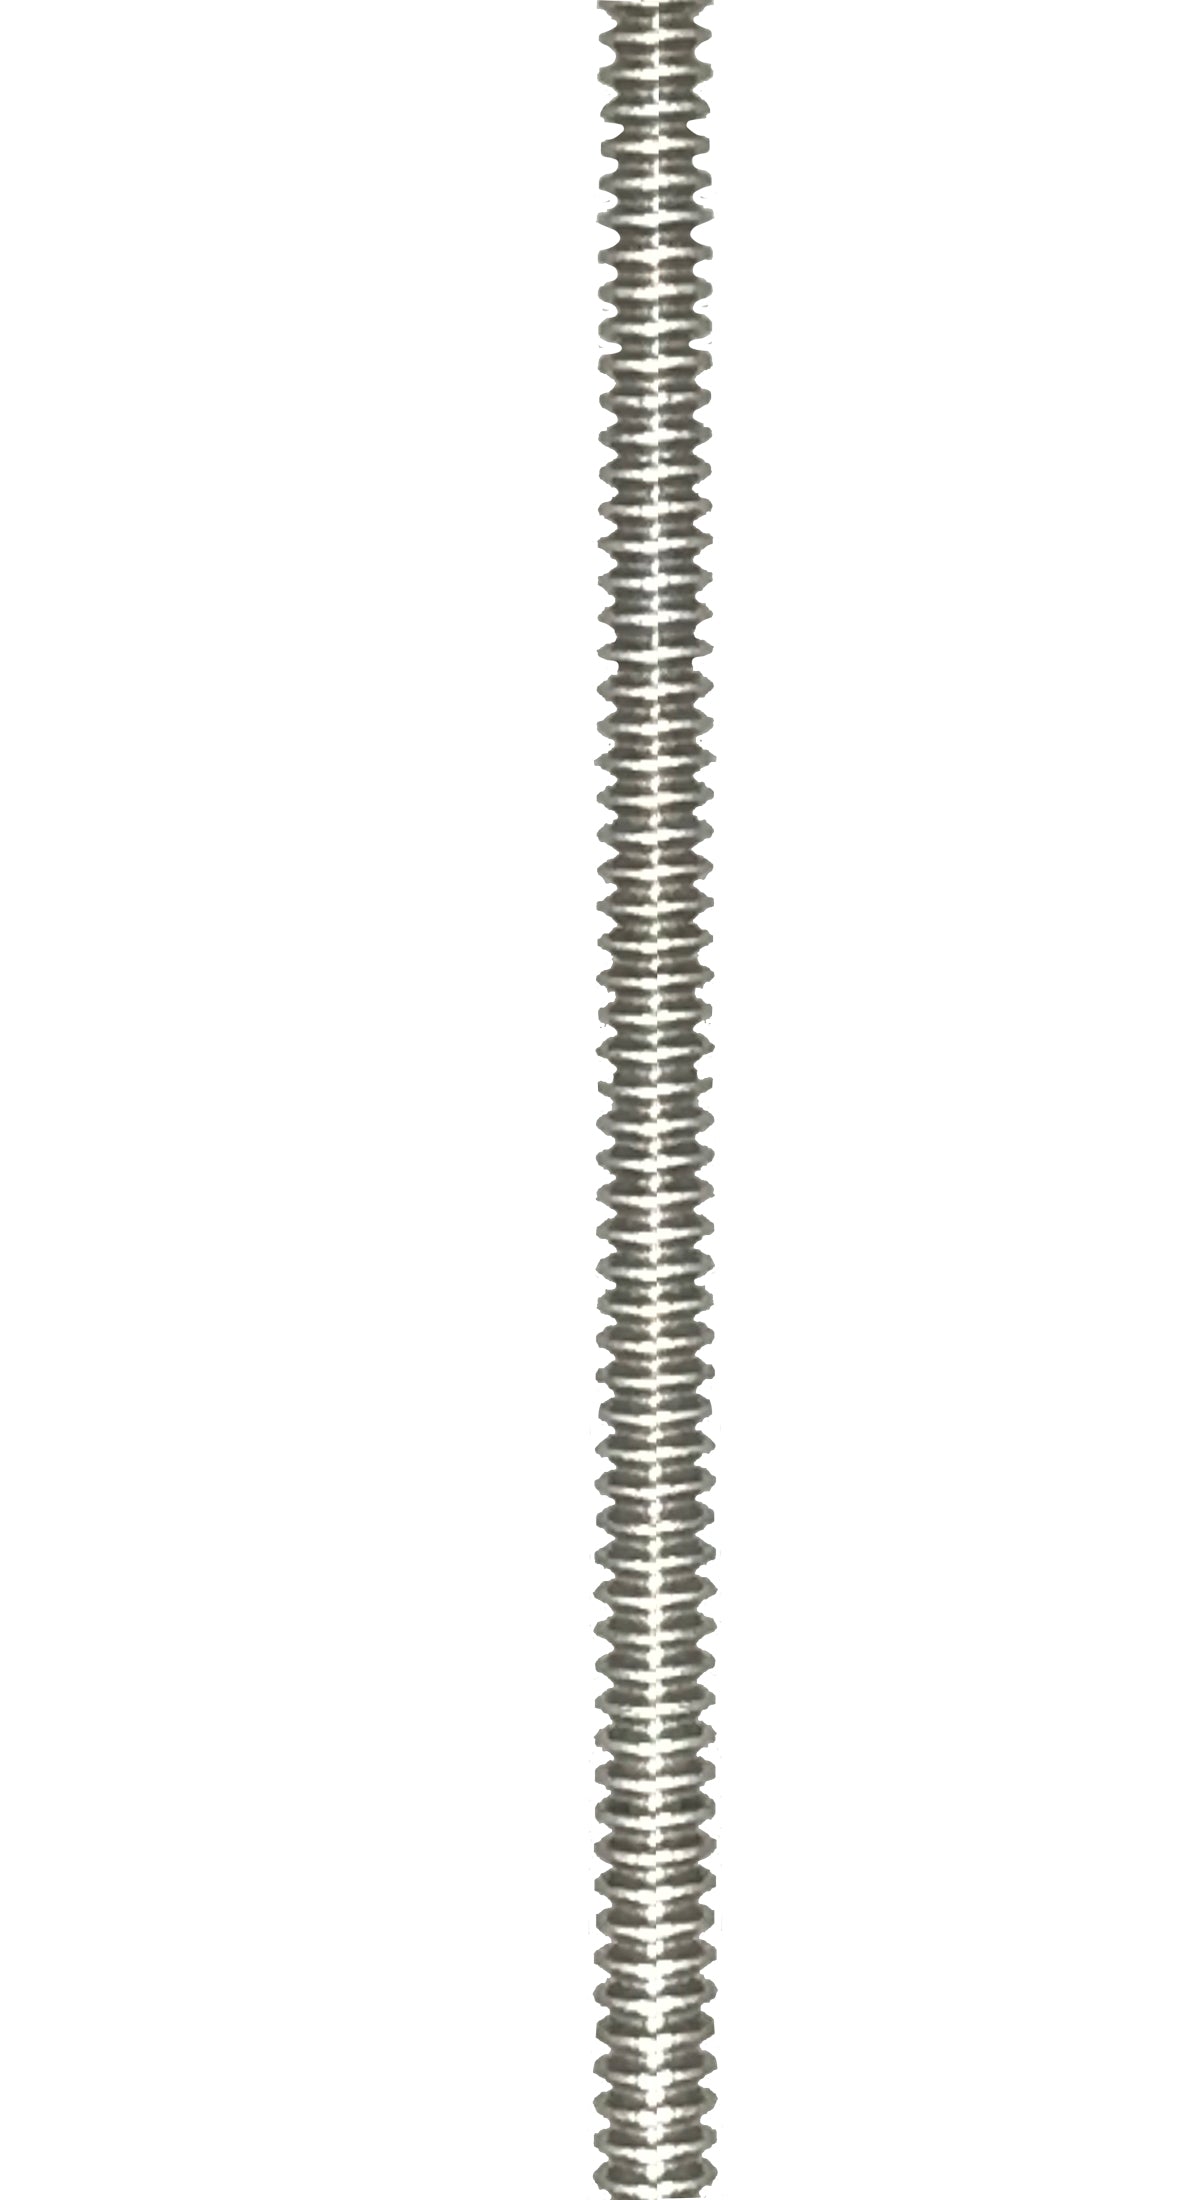 6-32 Stainless Steel Fully Threaded Rods (12" / 305mm)